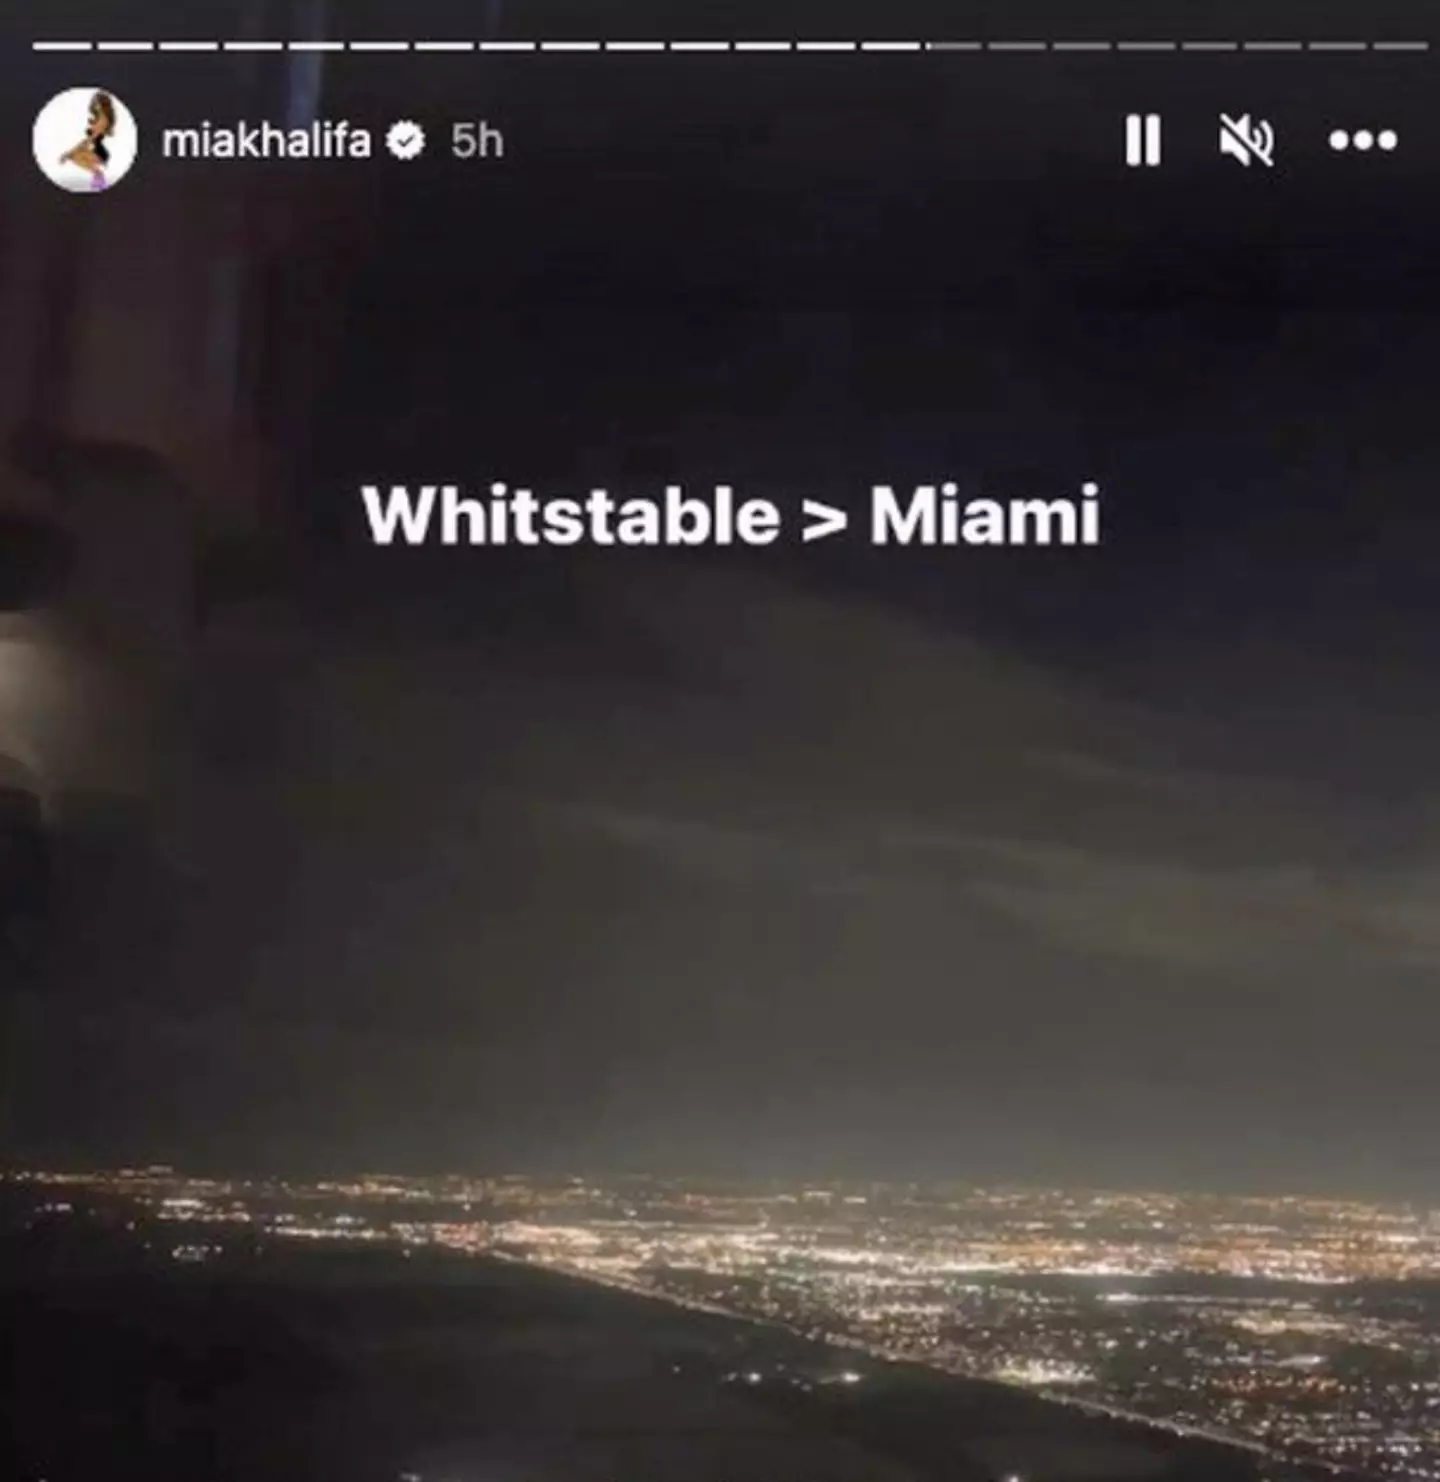 Khalifa claimed Whitstable was better than Miami.